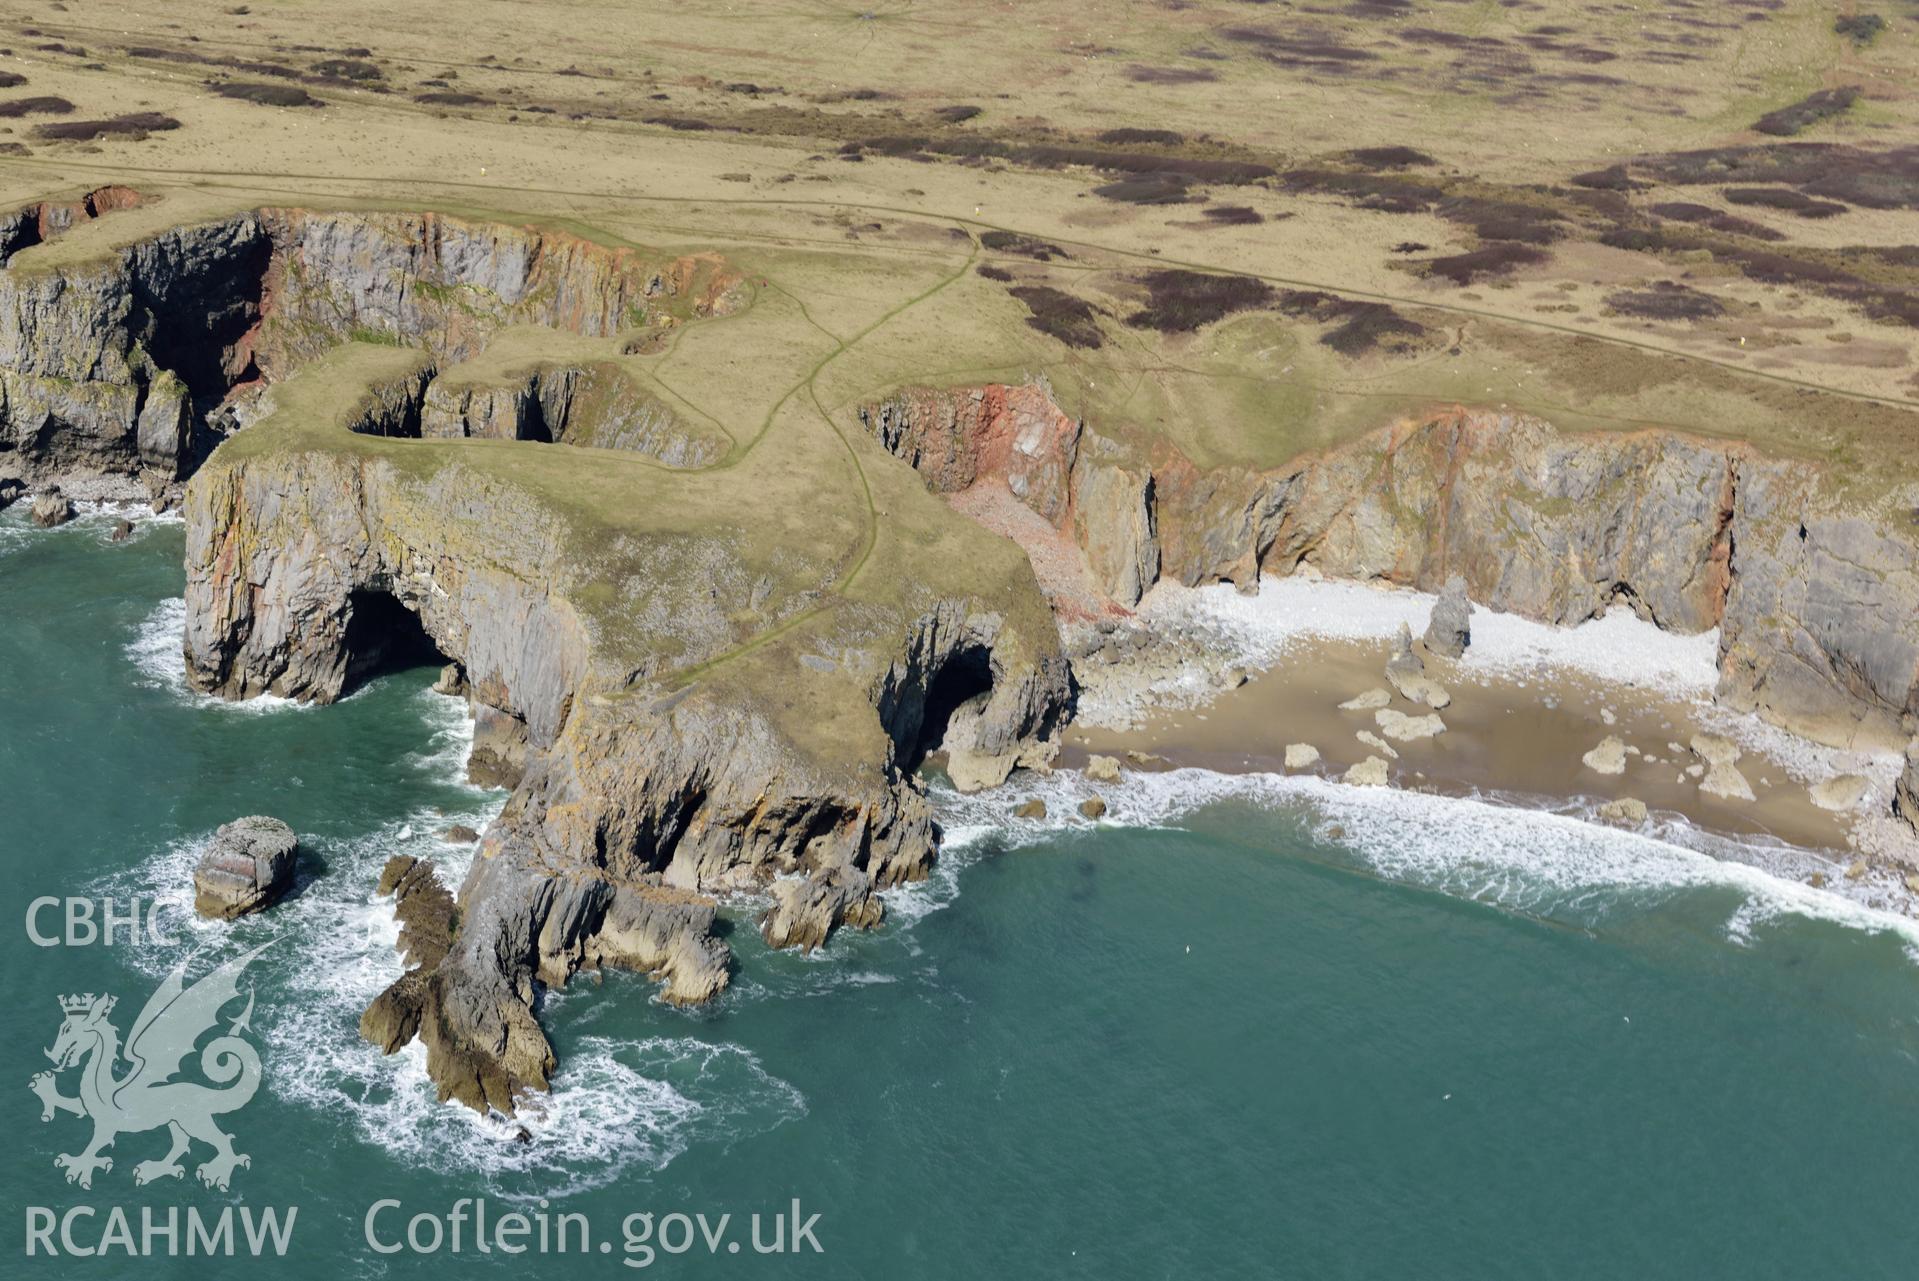 Flimston Bay promontory fort. Detailed baseline aerial reconnaissance survey for the CHERISH Project. ? Crown: CHERISH PROJECT 2018. Produced with EU funds through the Ireland Wales Co-operation Programme 2014-2020. All material made freely available through the Open Government Licence.